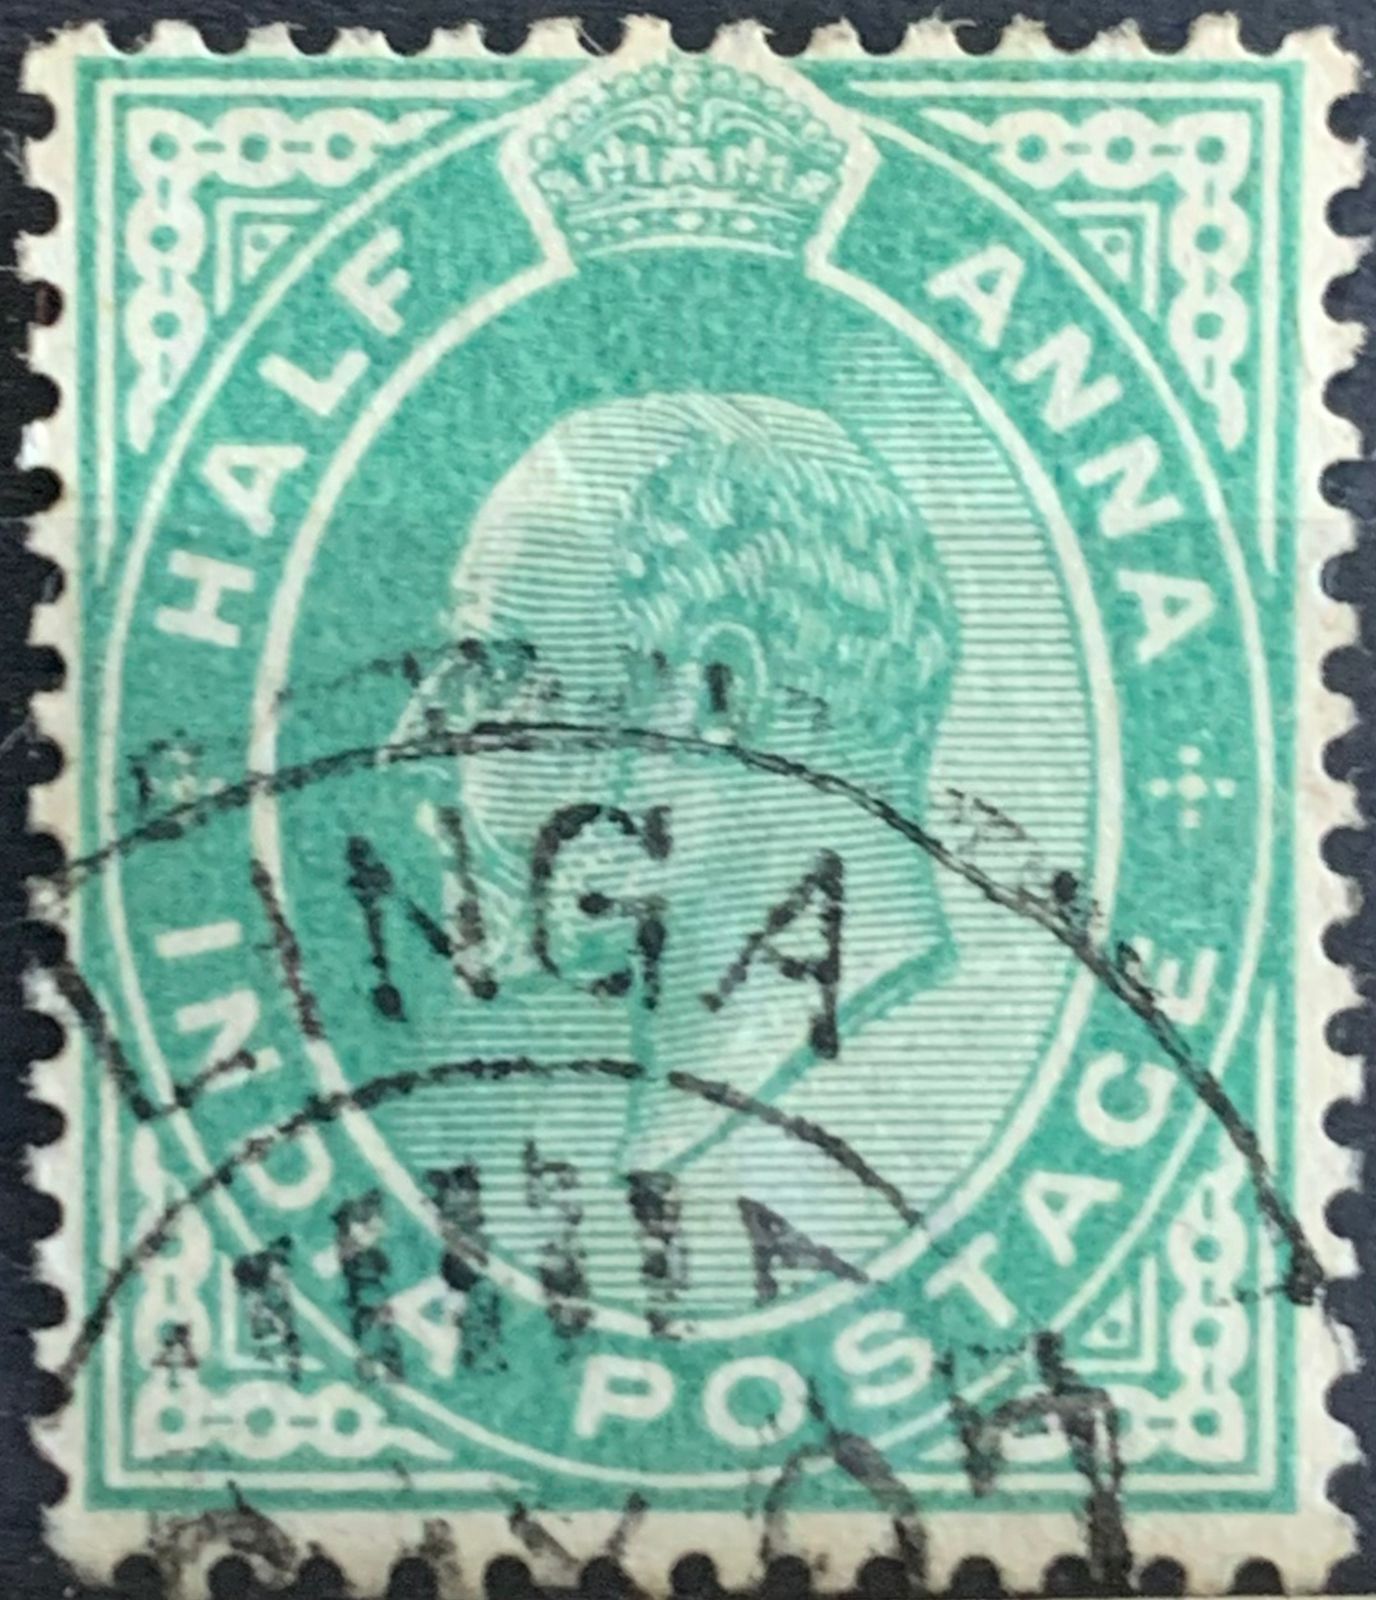 India 1902 KEVII 1/2a Used Abroad in LINGA Fine Cancelled